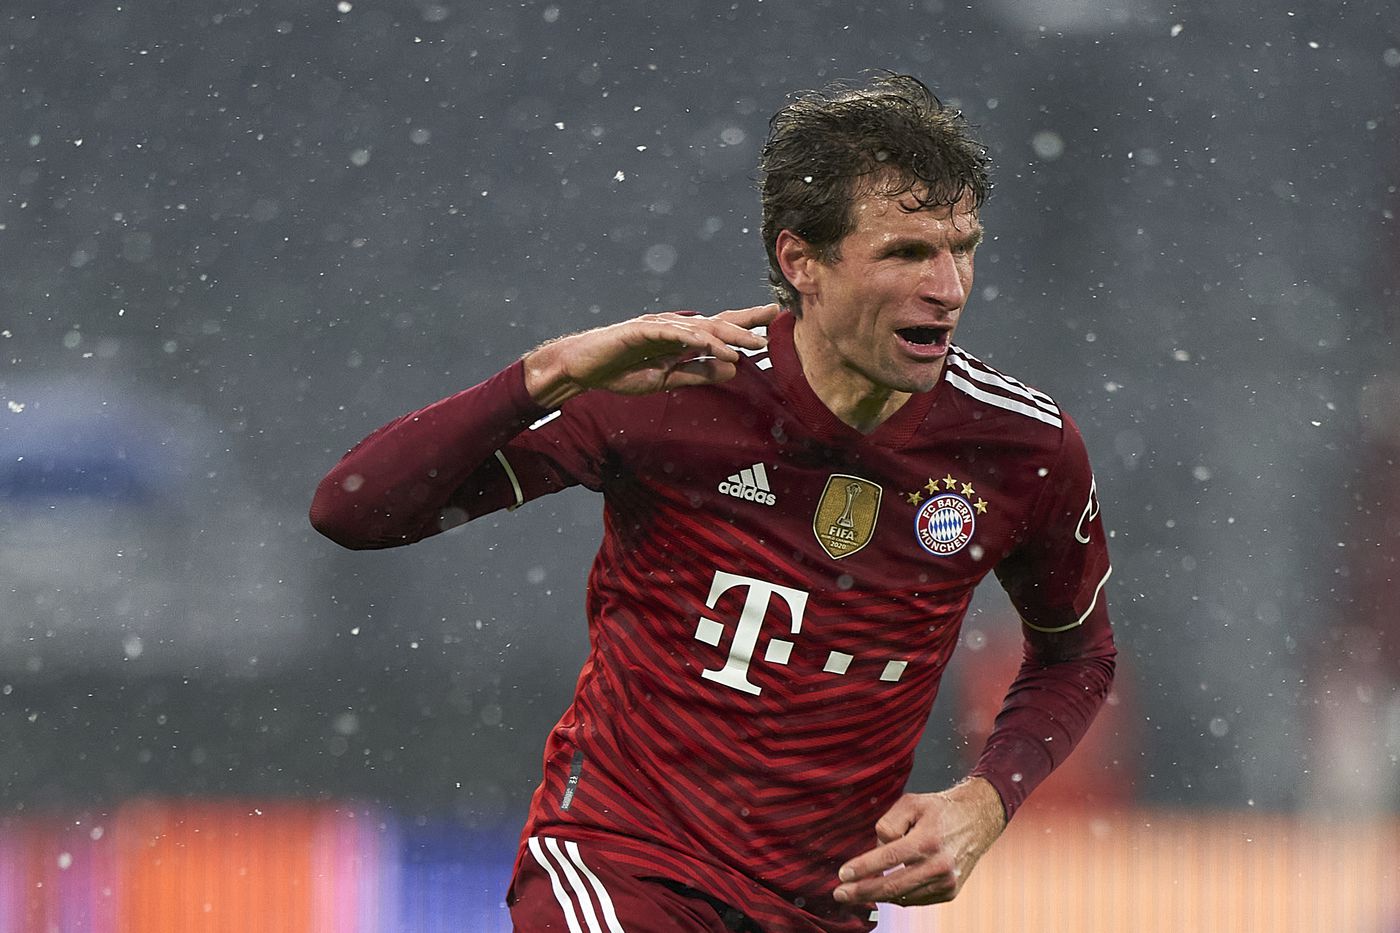 Milestone performance: Bayern Munich's Thomas Müller becomes eighth player to score Champions League 50 goals Football Works